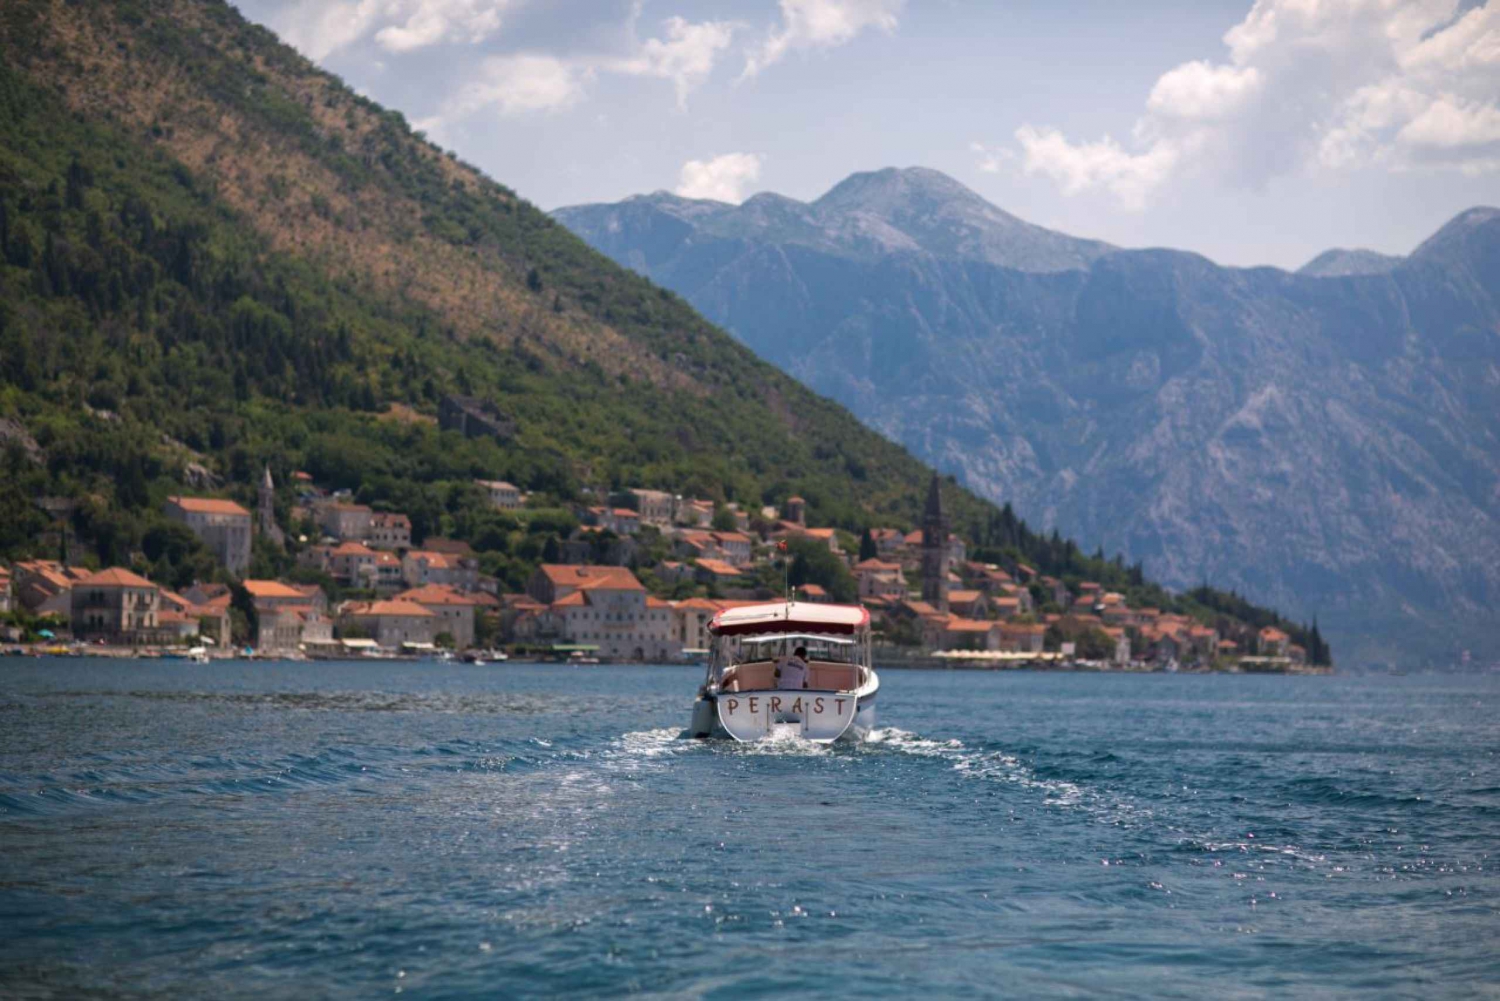 Perast Kotor Bay: boat to Our lady of the rocks